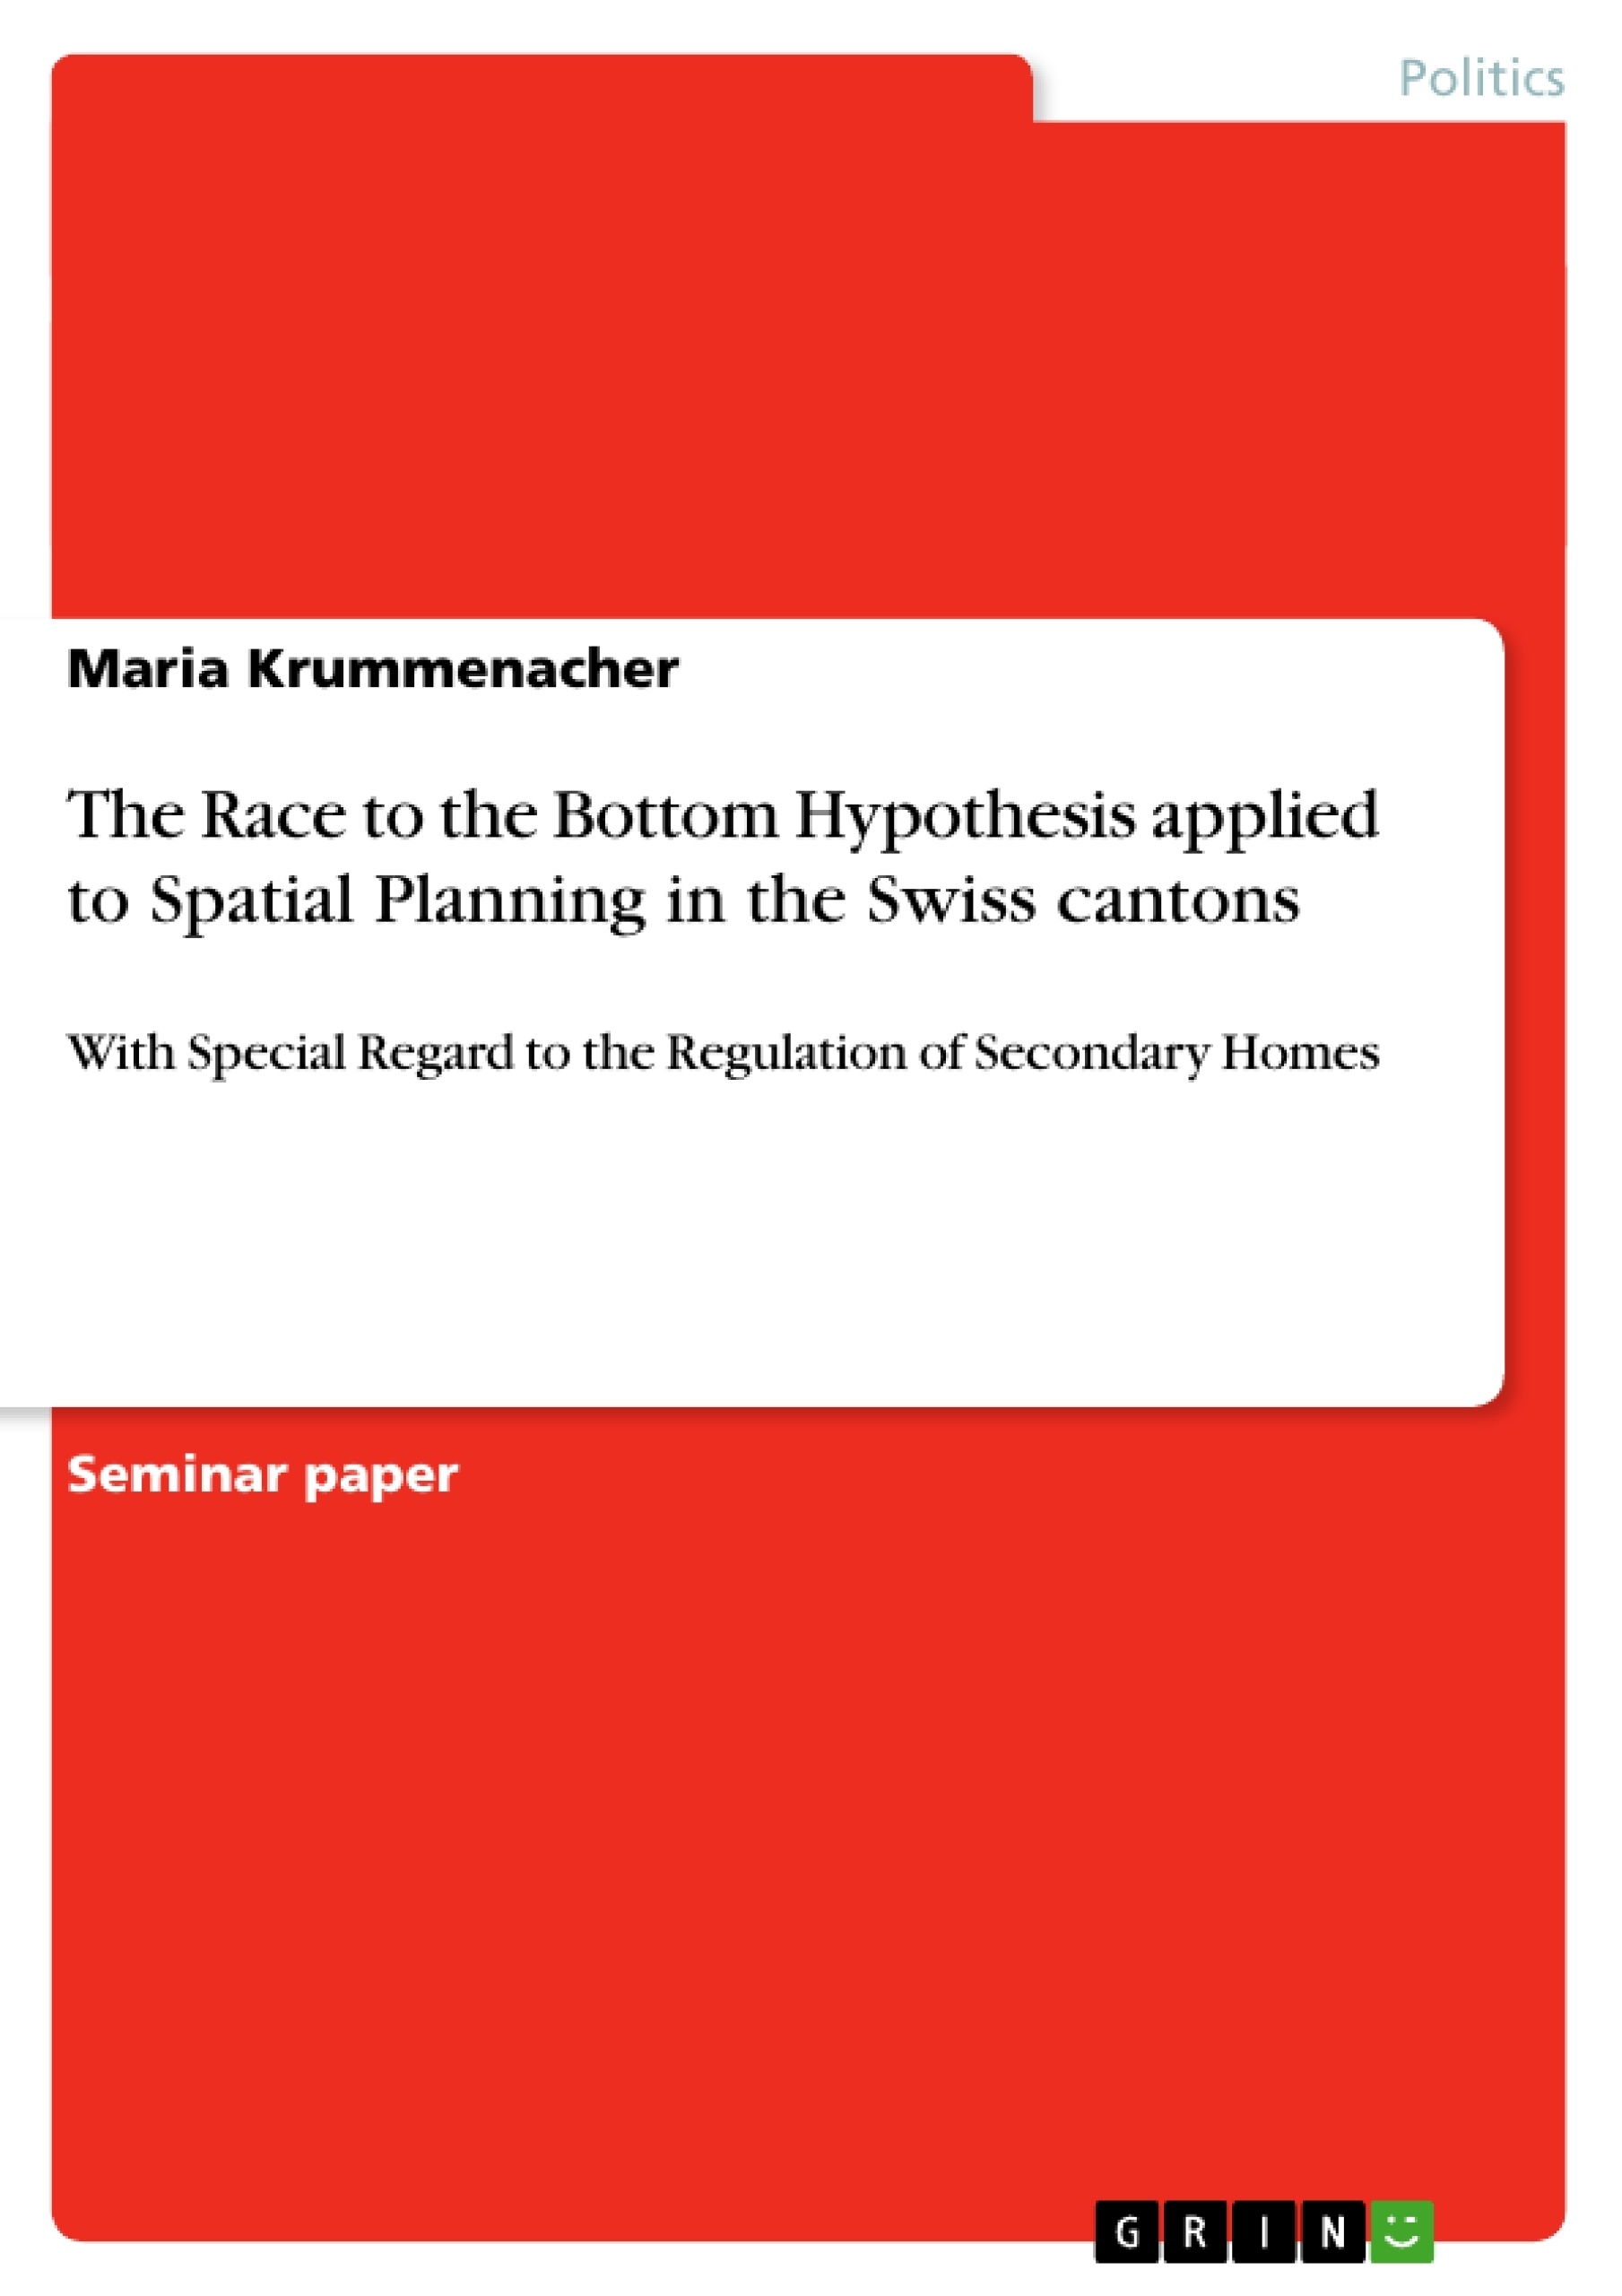 Titre: The Race to the Bottom Hypothesis applied to Spatial Planning in the Swiss cantons